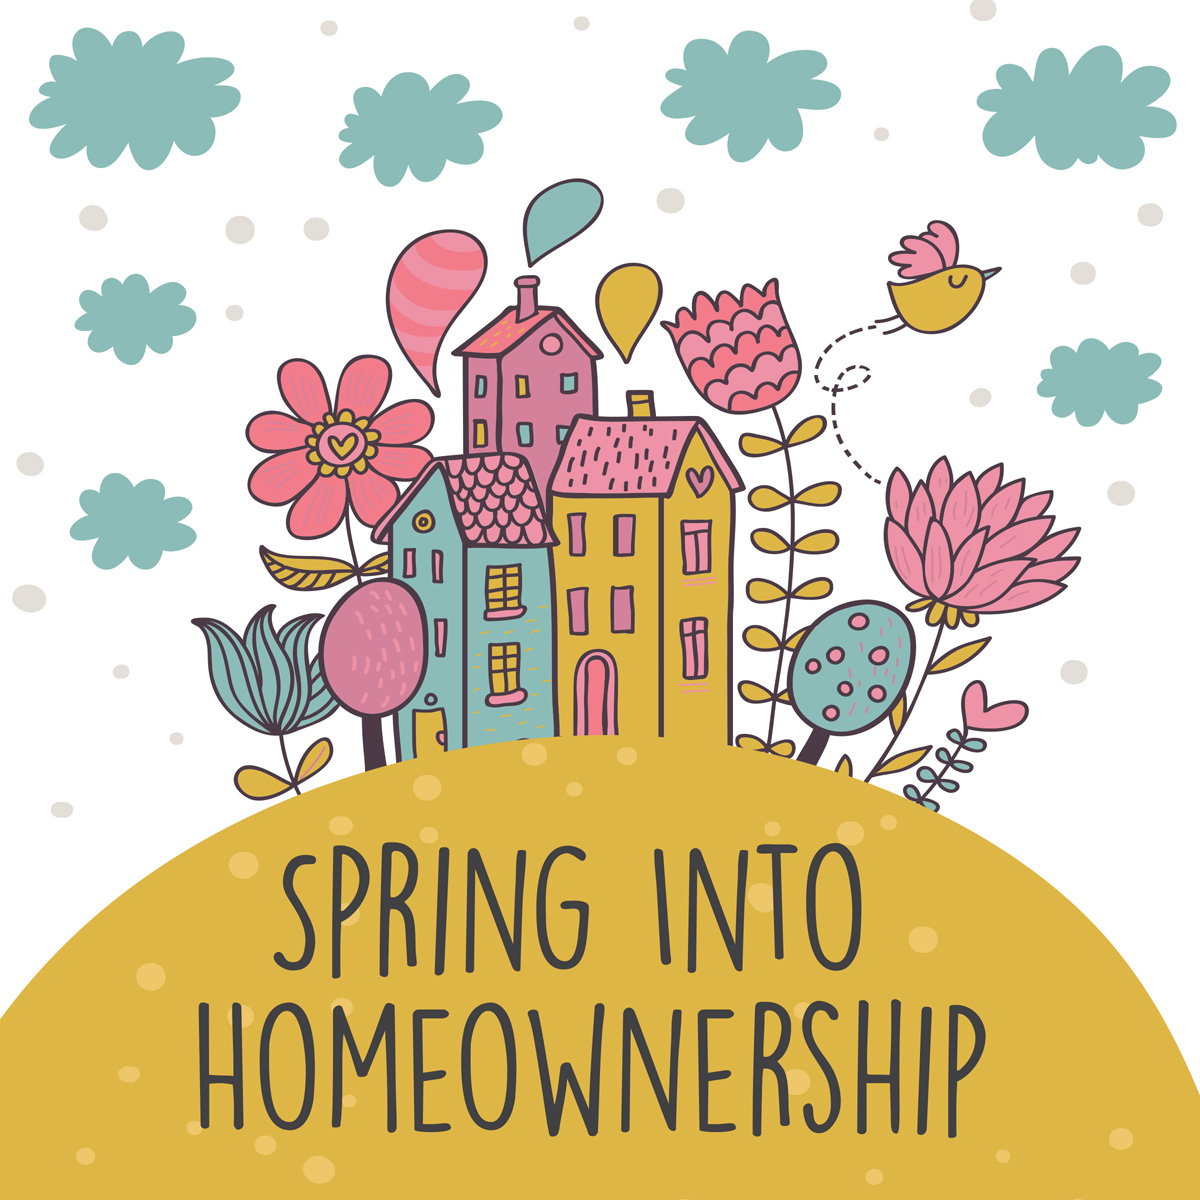 Spring into homeownership this season! With low interest rates, more inventory and the perfect weather to househunt, it's the best time for renters to make their dream of owning a home a reality. Don't miss out on this opportunity!